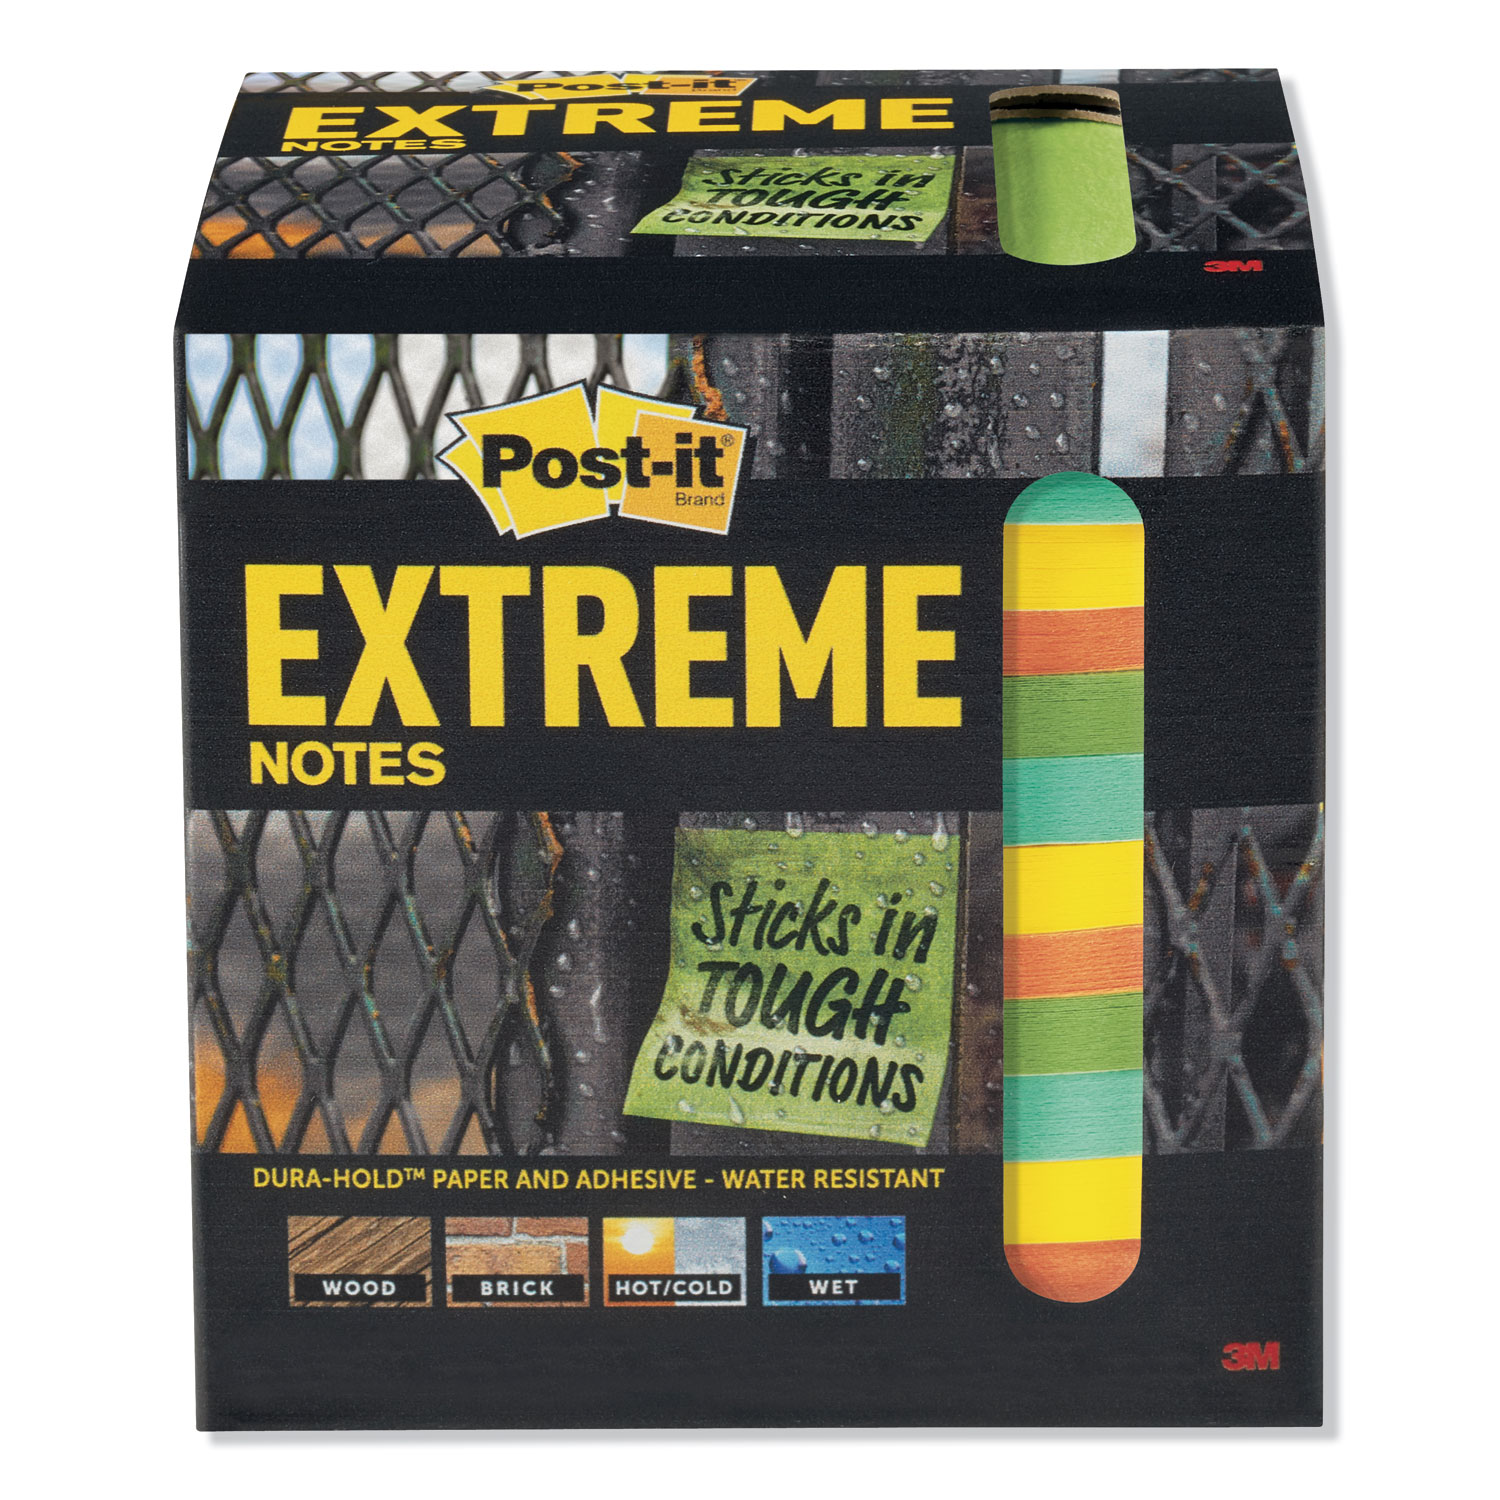  Post-it Extreme Notes XTRM3312TRYX Water-Resistant Self-Stick Notes, Multi-Colored, 3 x 3, 45 Sheets, 12/Pack (MMMXTRM3312TRYX) 